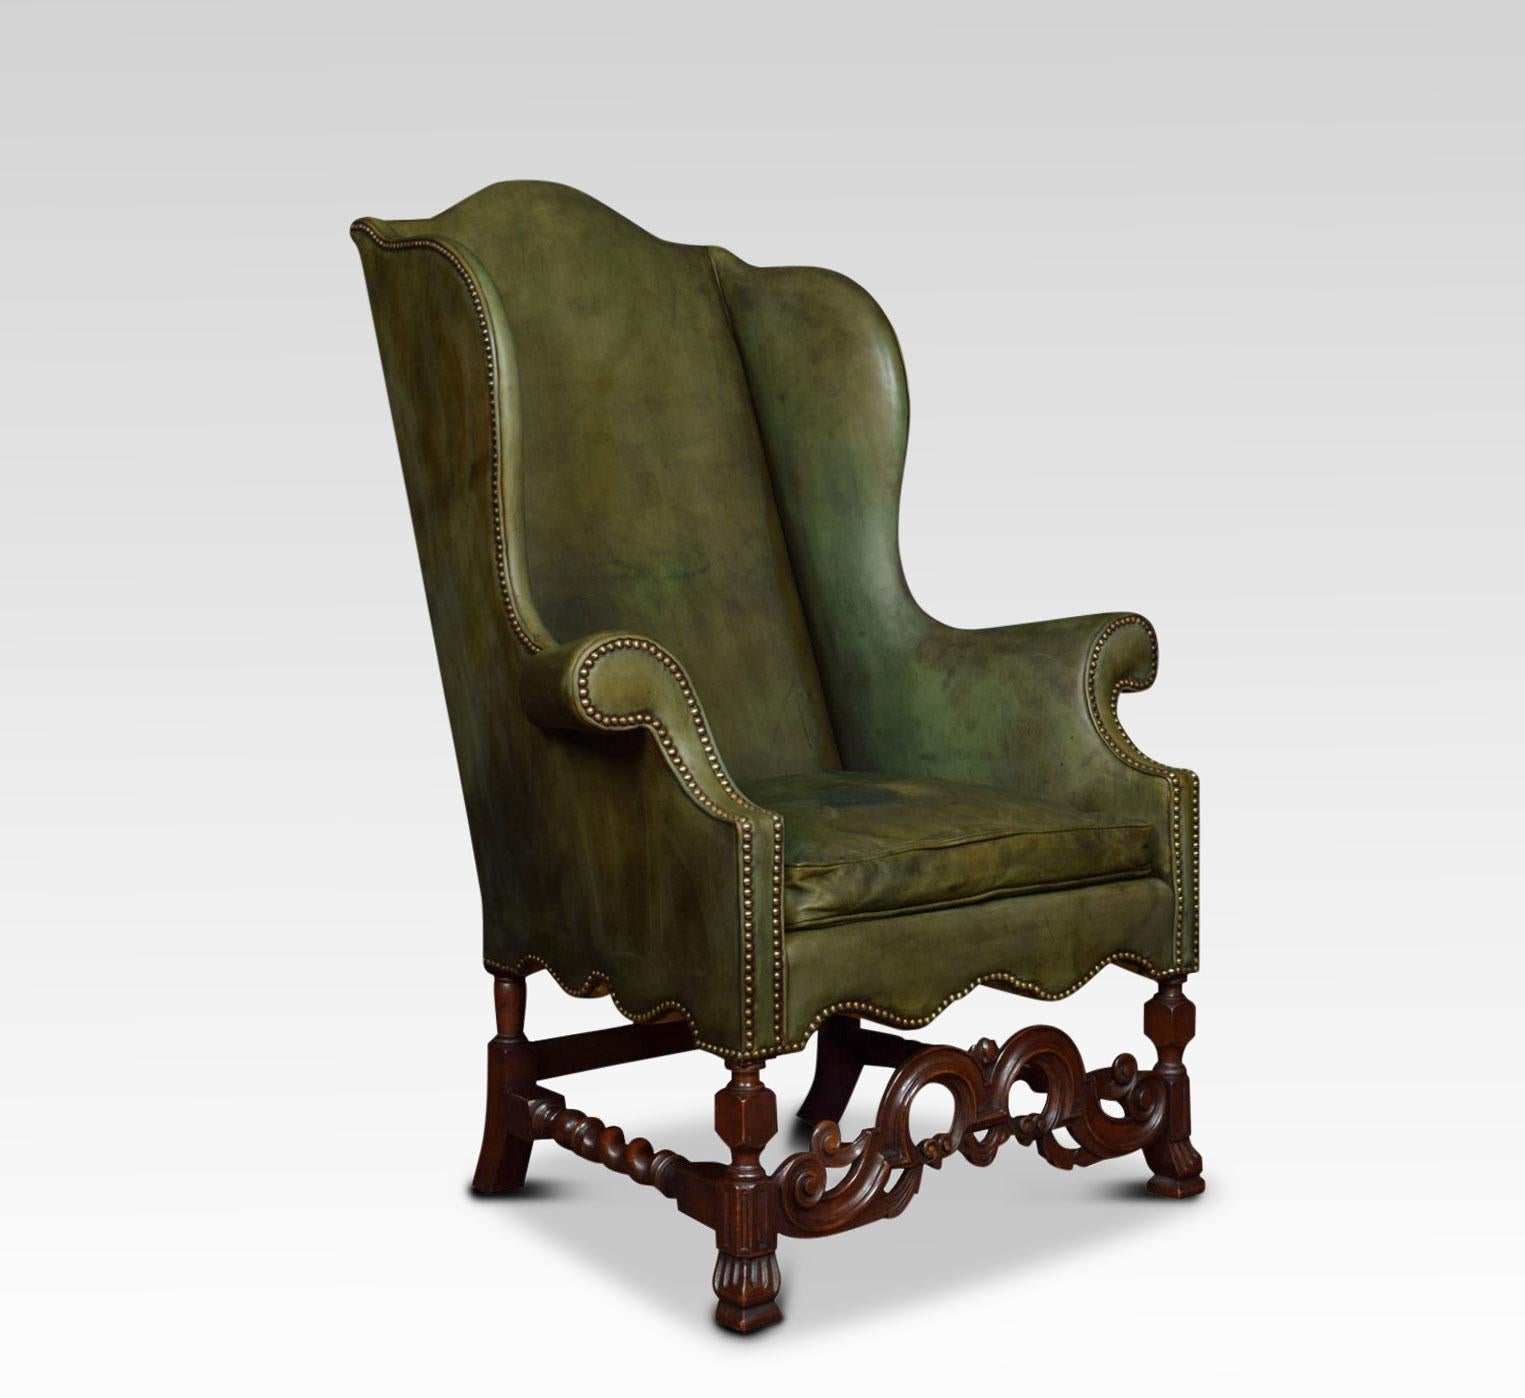 Walnut framed high back armchair was designed and created in the Carolean style of the third quarter of the 17th century, it has a high arched back above the two wings, out swept scroll arms, turned legs and barley twist stretchers, joined by an